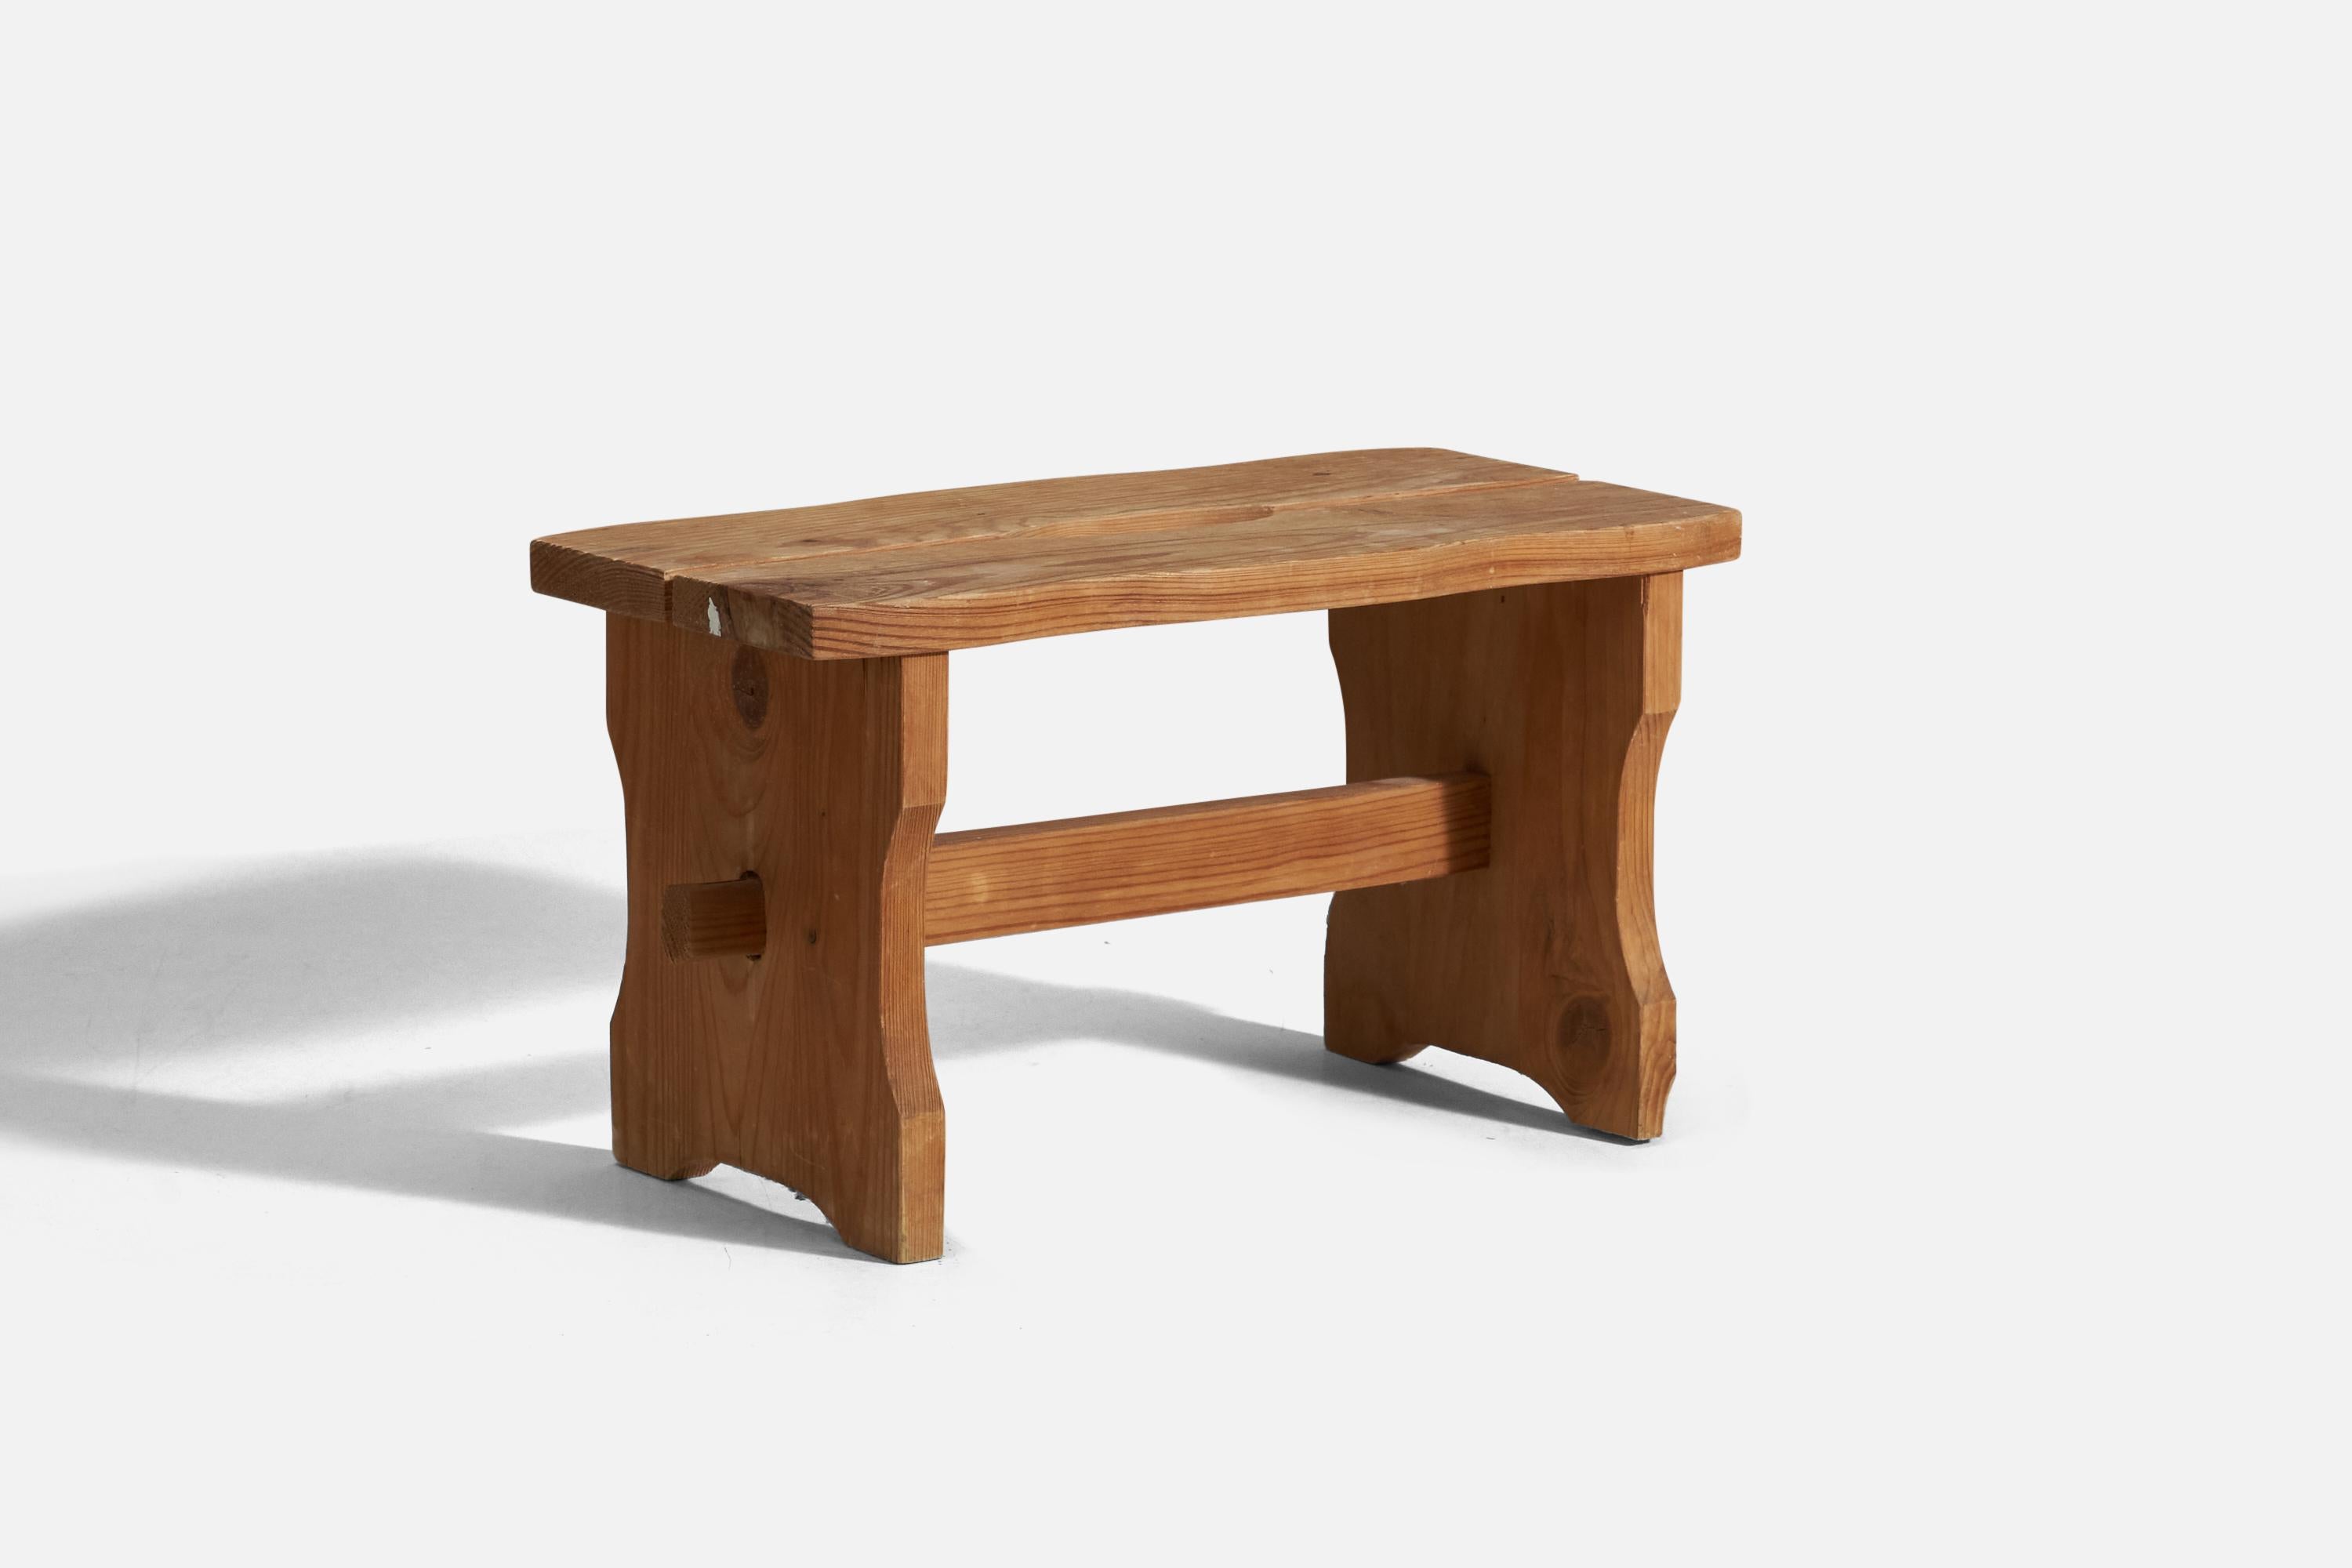 A pine stool designed and produced in Sweden, 1940s.